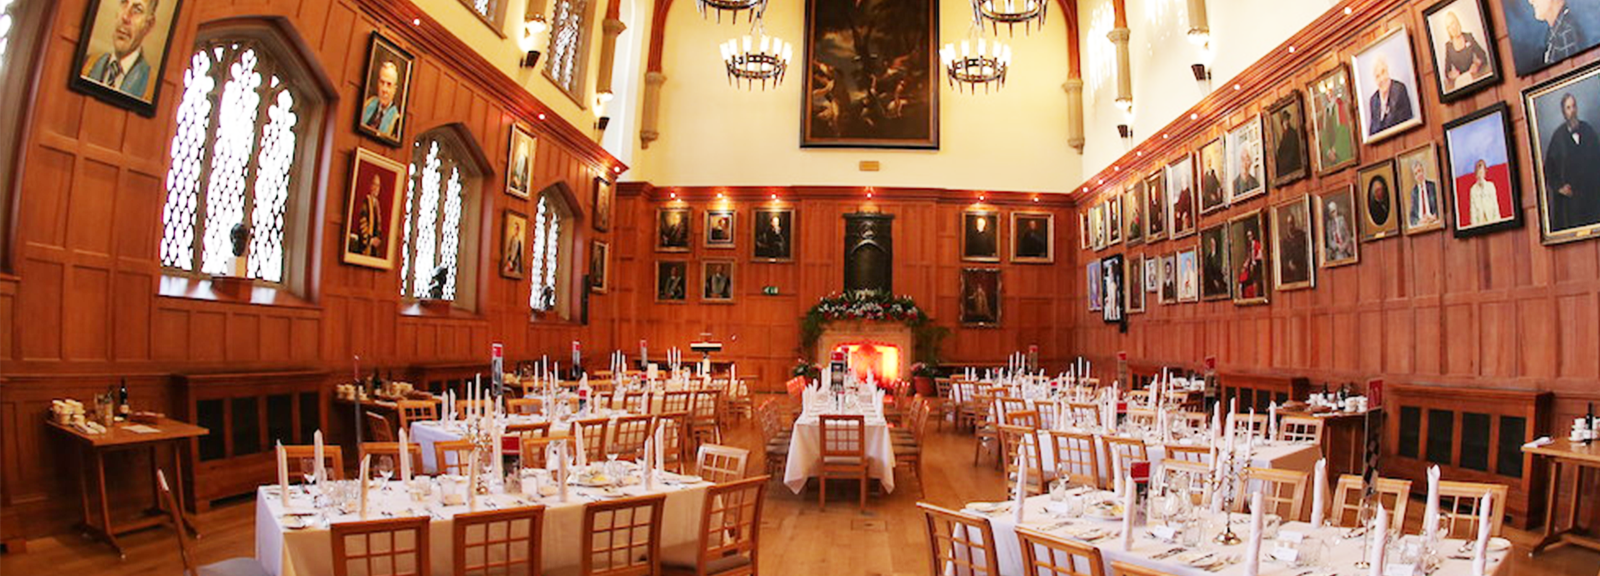 Banqueting at Queen's University